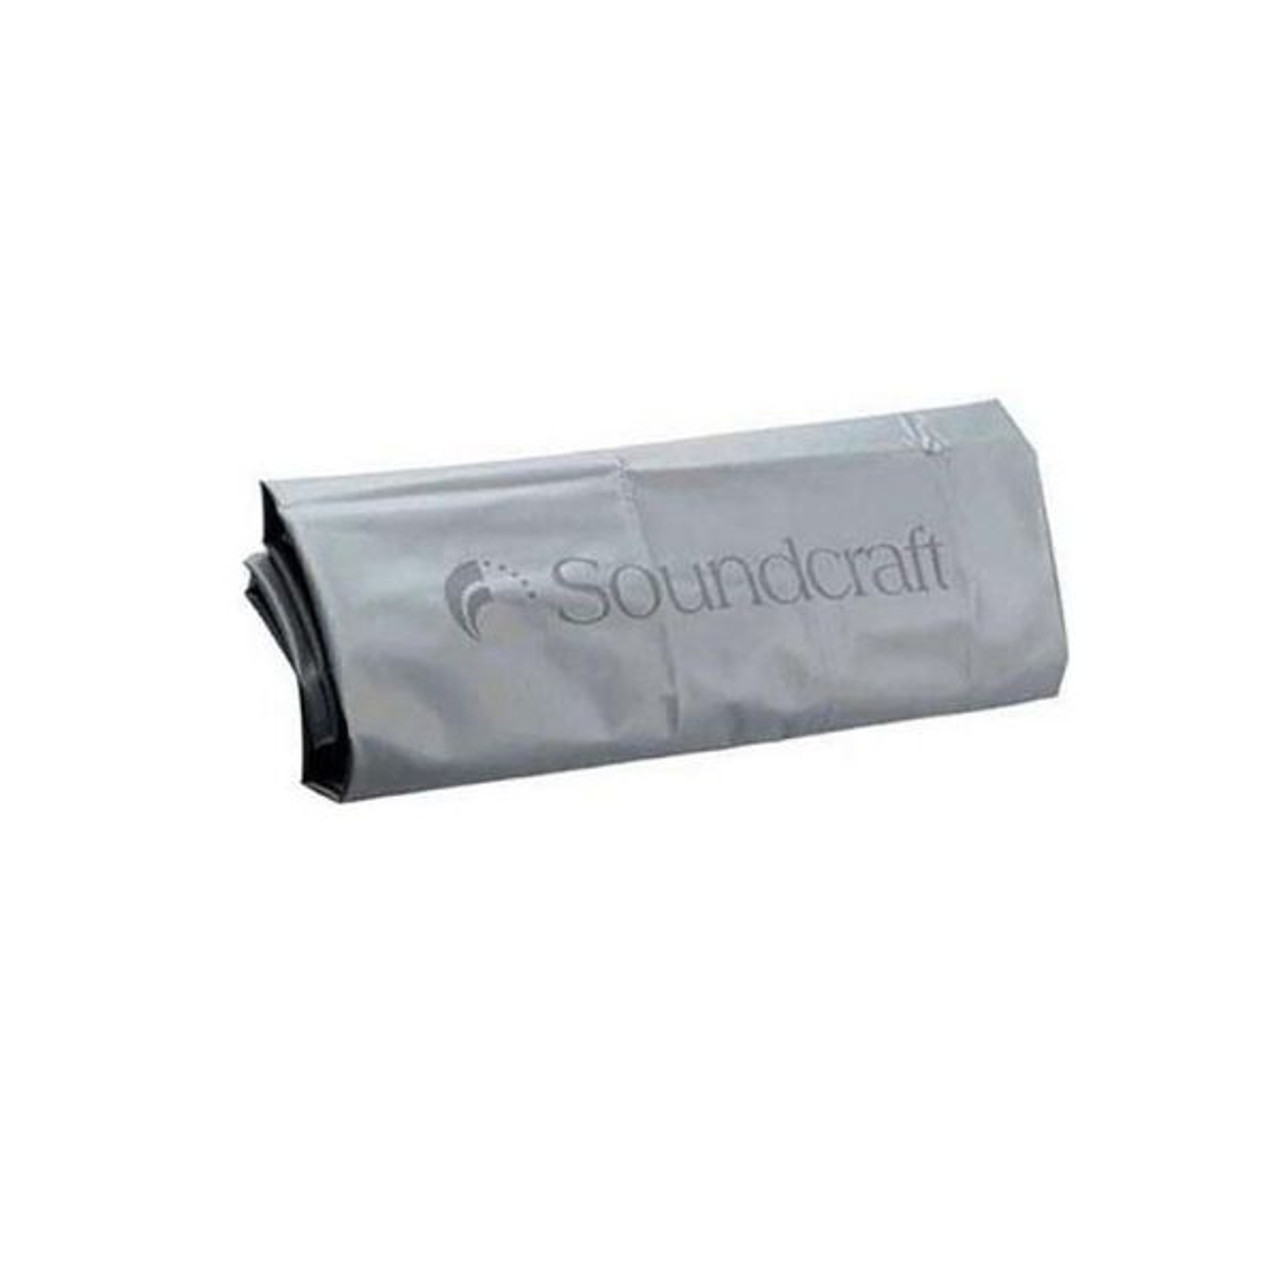 Soundcraft TZ2453 Dust Cover for GB416